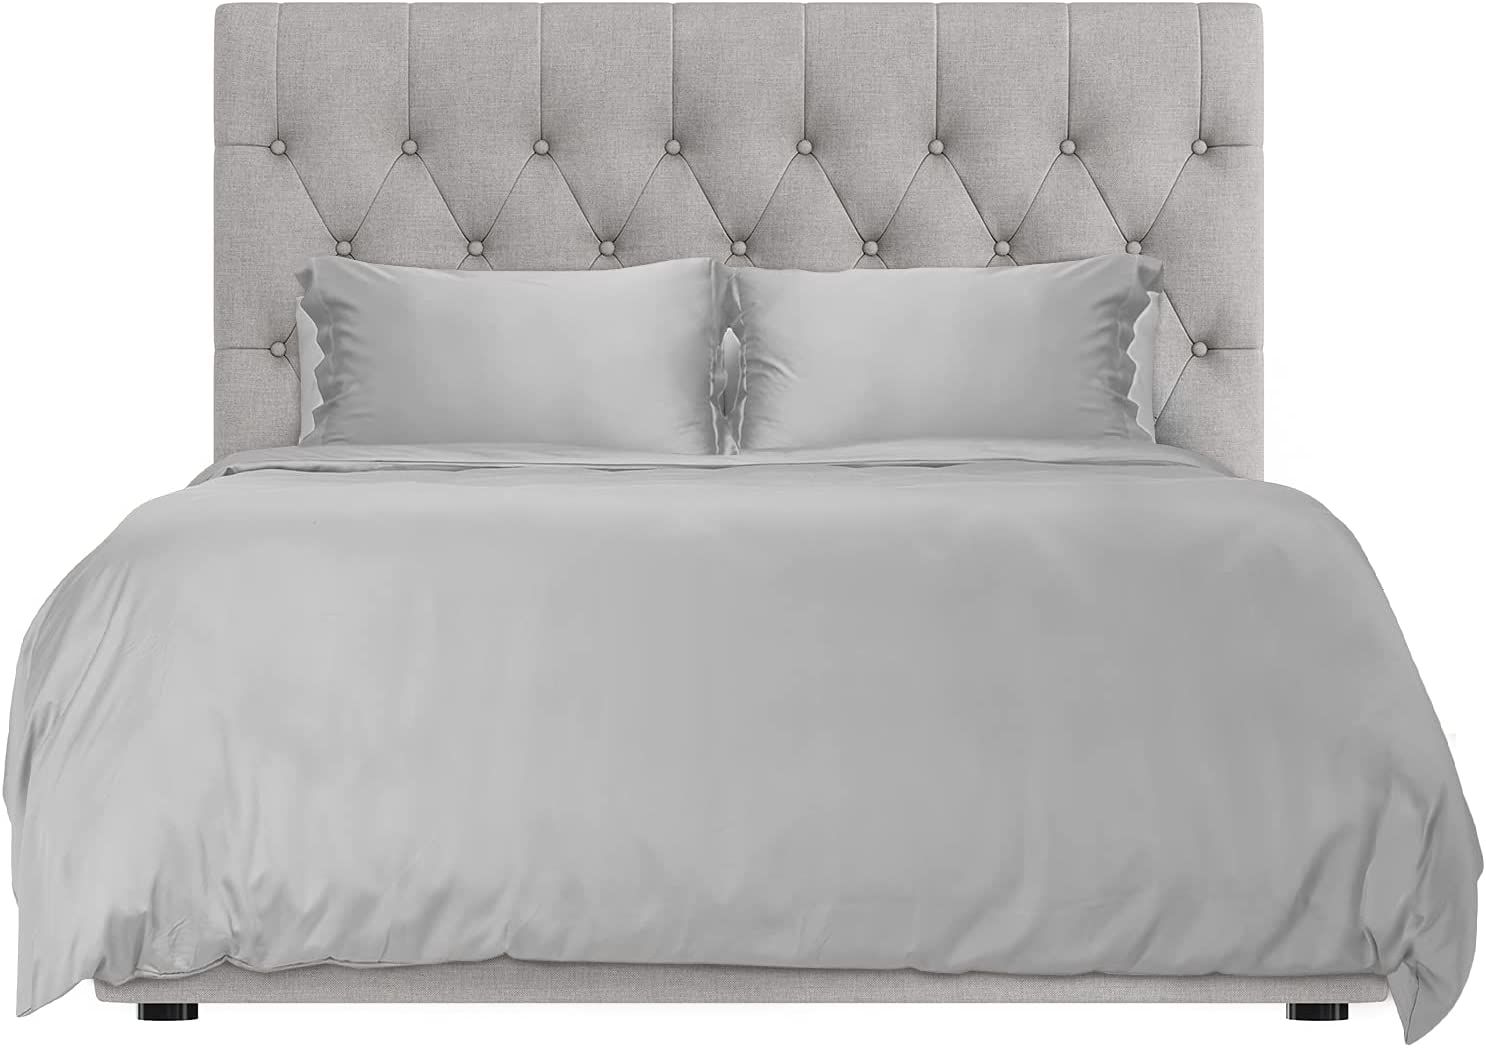 Price:$79.99  Sheets Direct 100% Bamboo Duvet Cover 3 Piece Set - Better Than Silk - 1 Duvet Cover, 2 Pillow Shams with Corner Ties and Zipper Closure (King, Grey) : Home & Kitchen